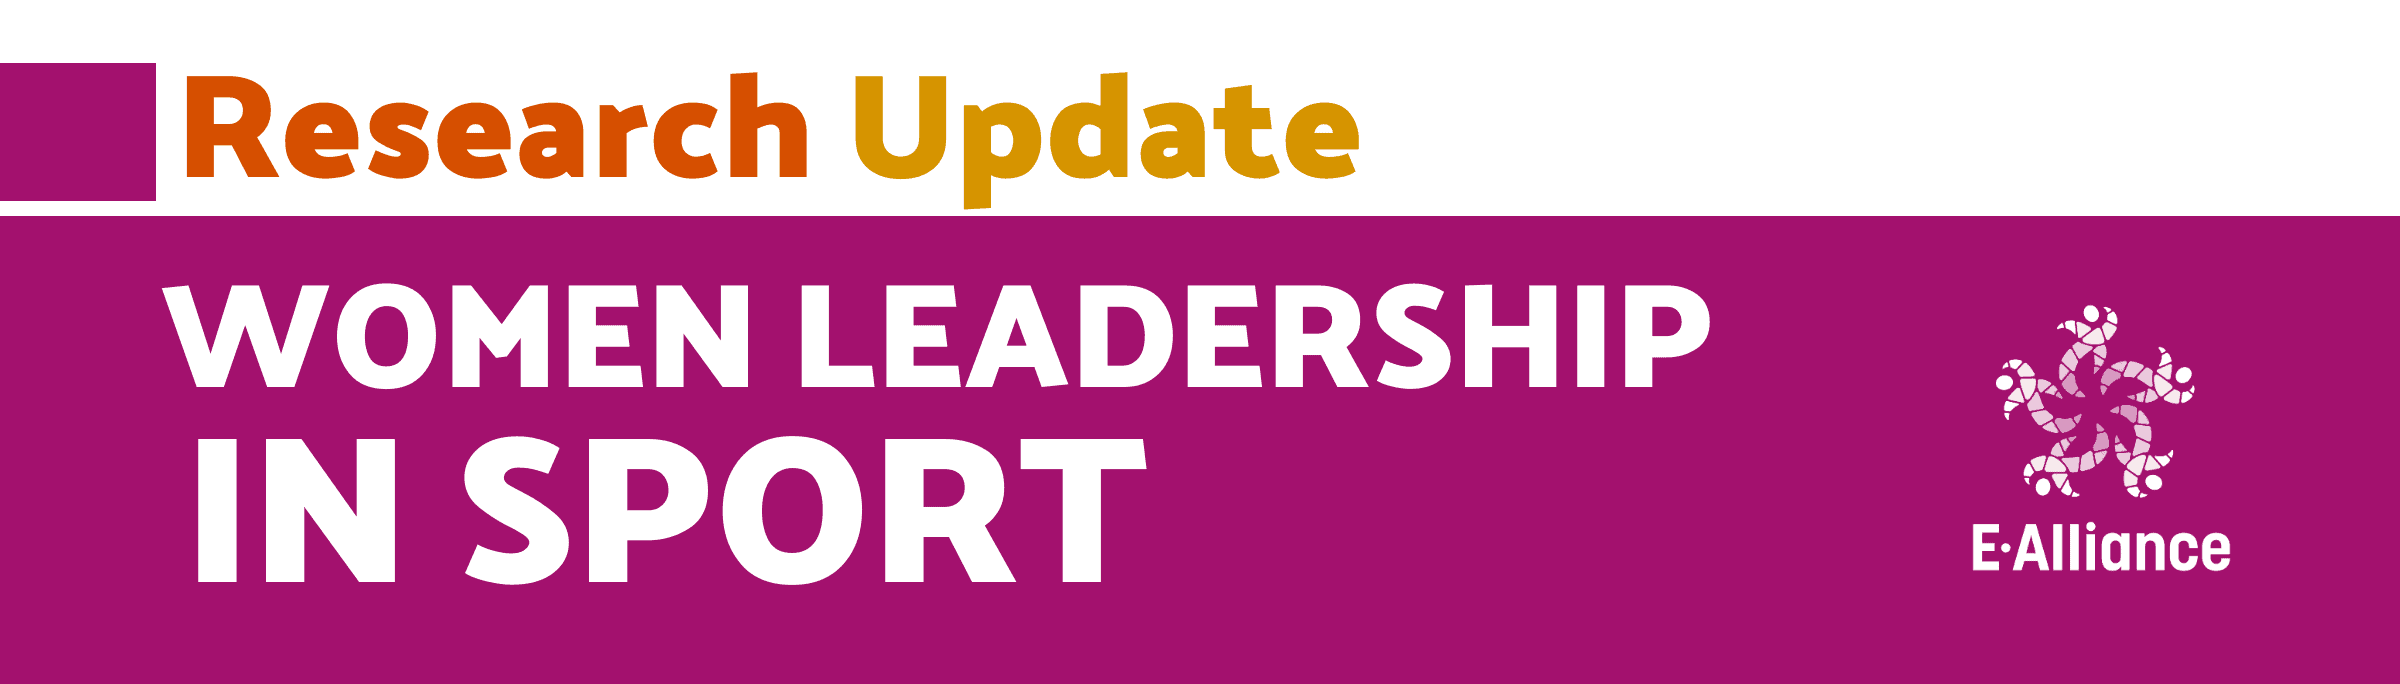 Research Update Women Leadership in Sport Graphic linking to key E-Alliance Researching Findings